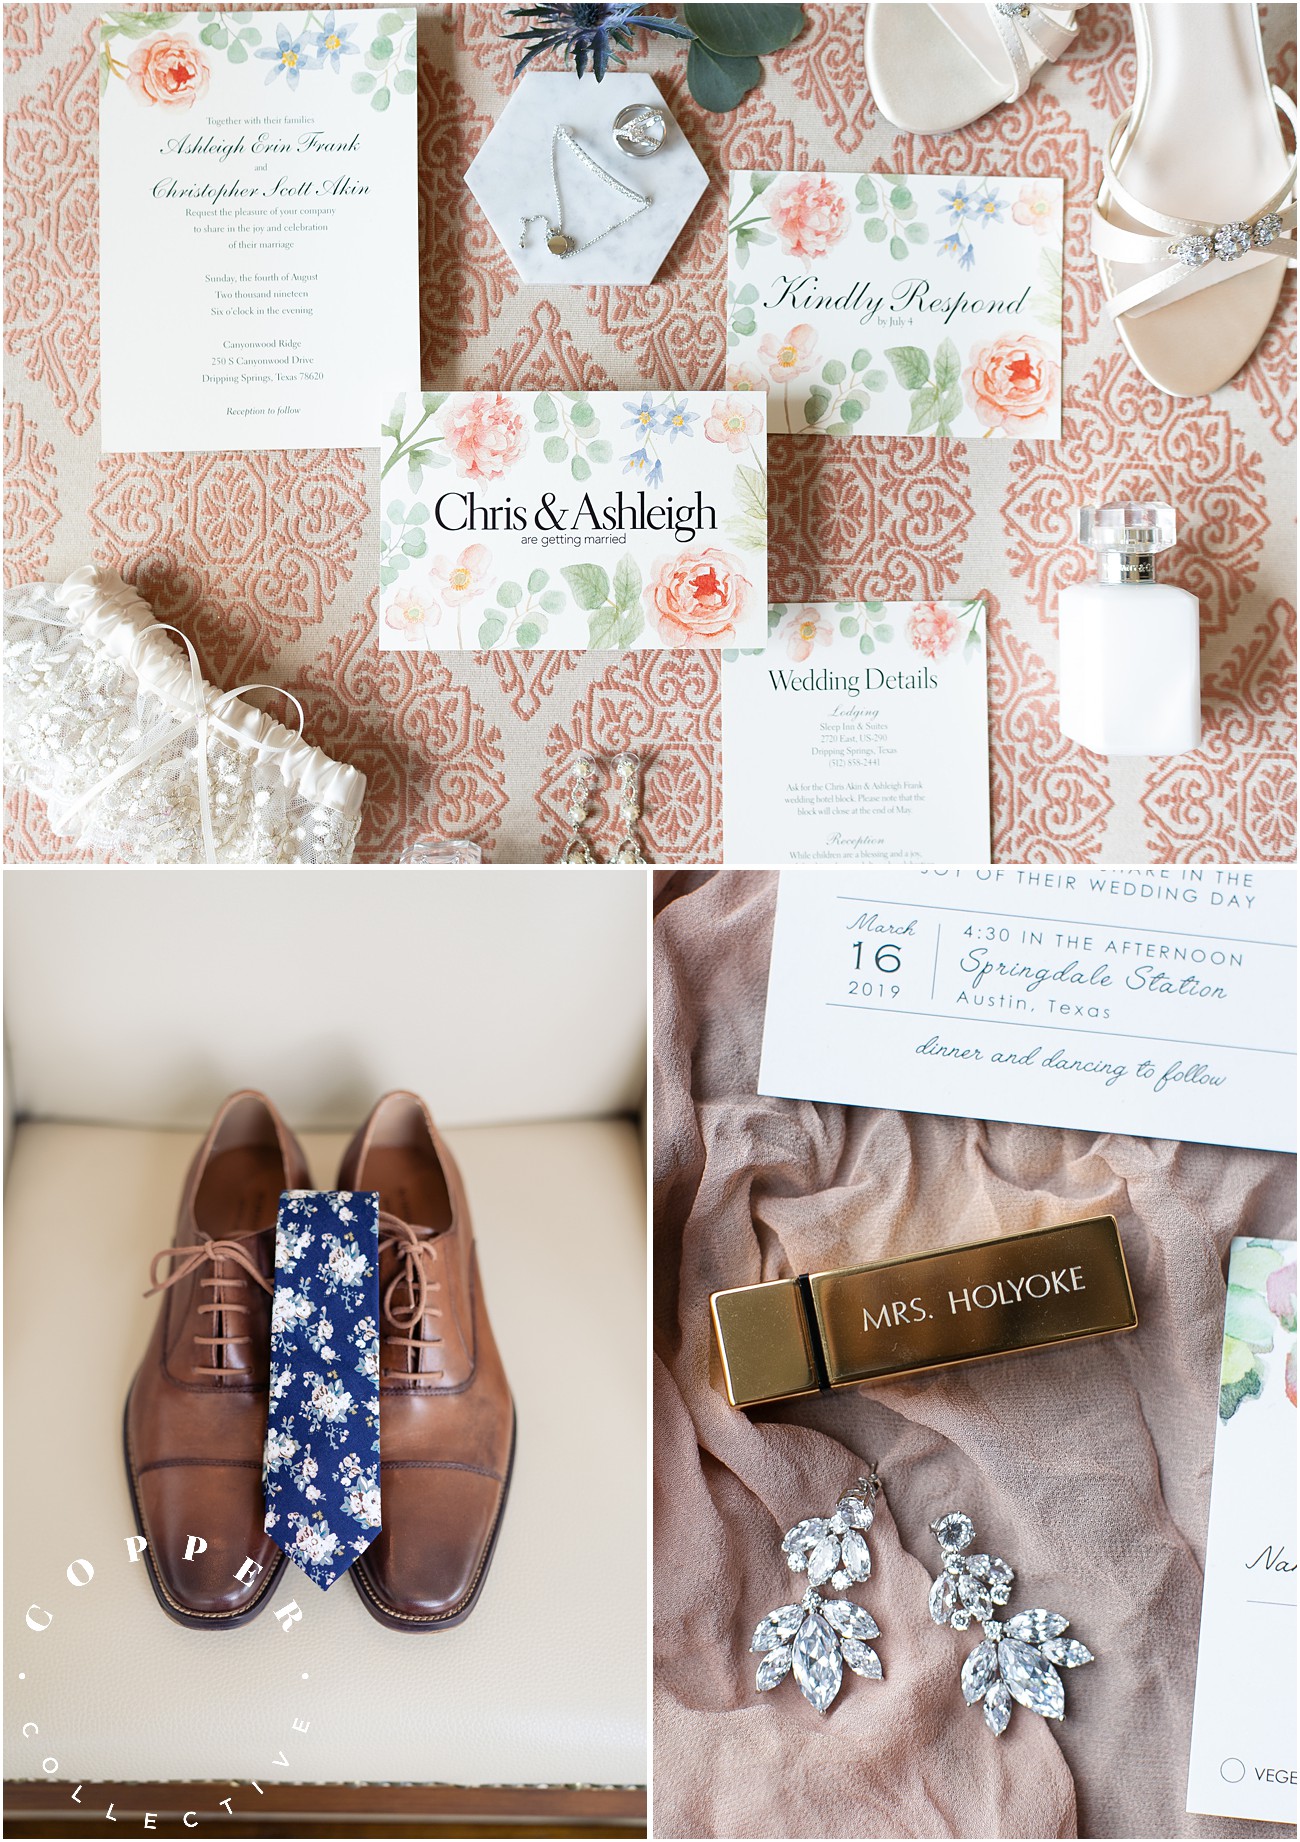 wedding day details invitations with florals and jewelry